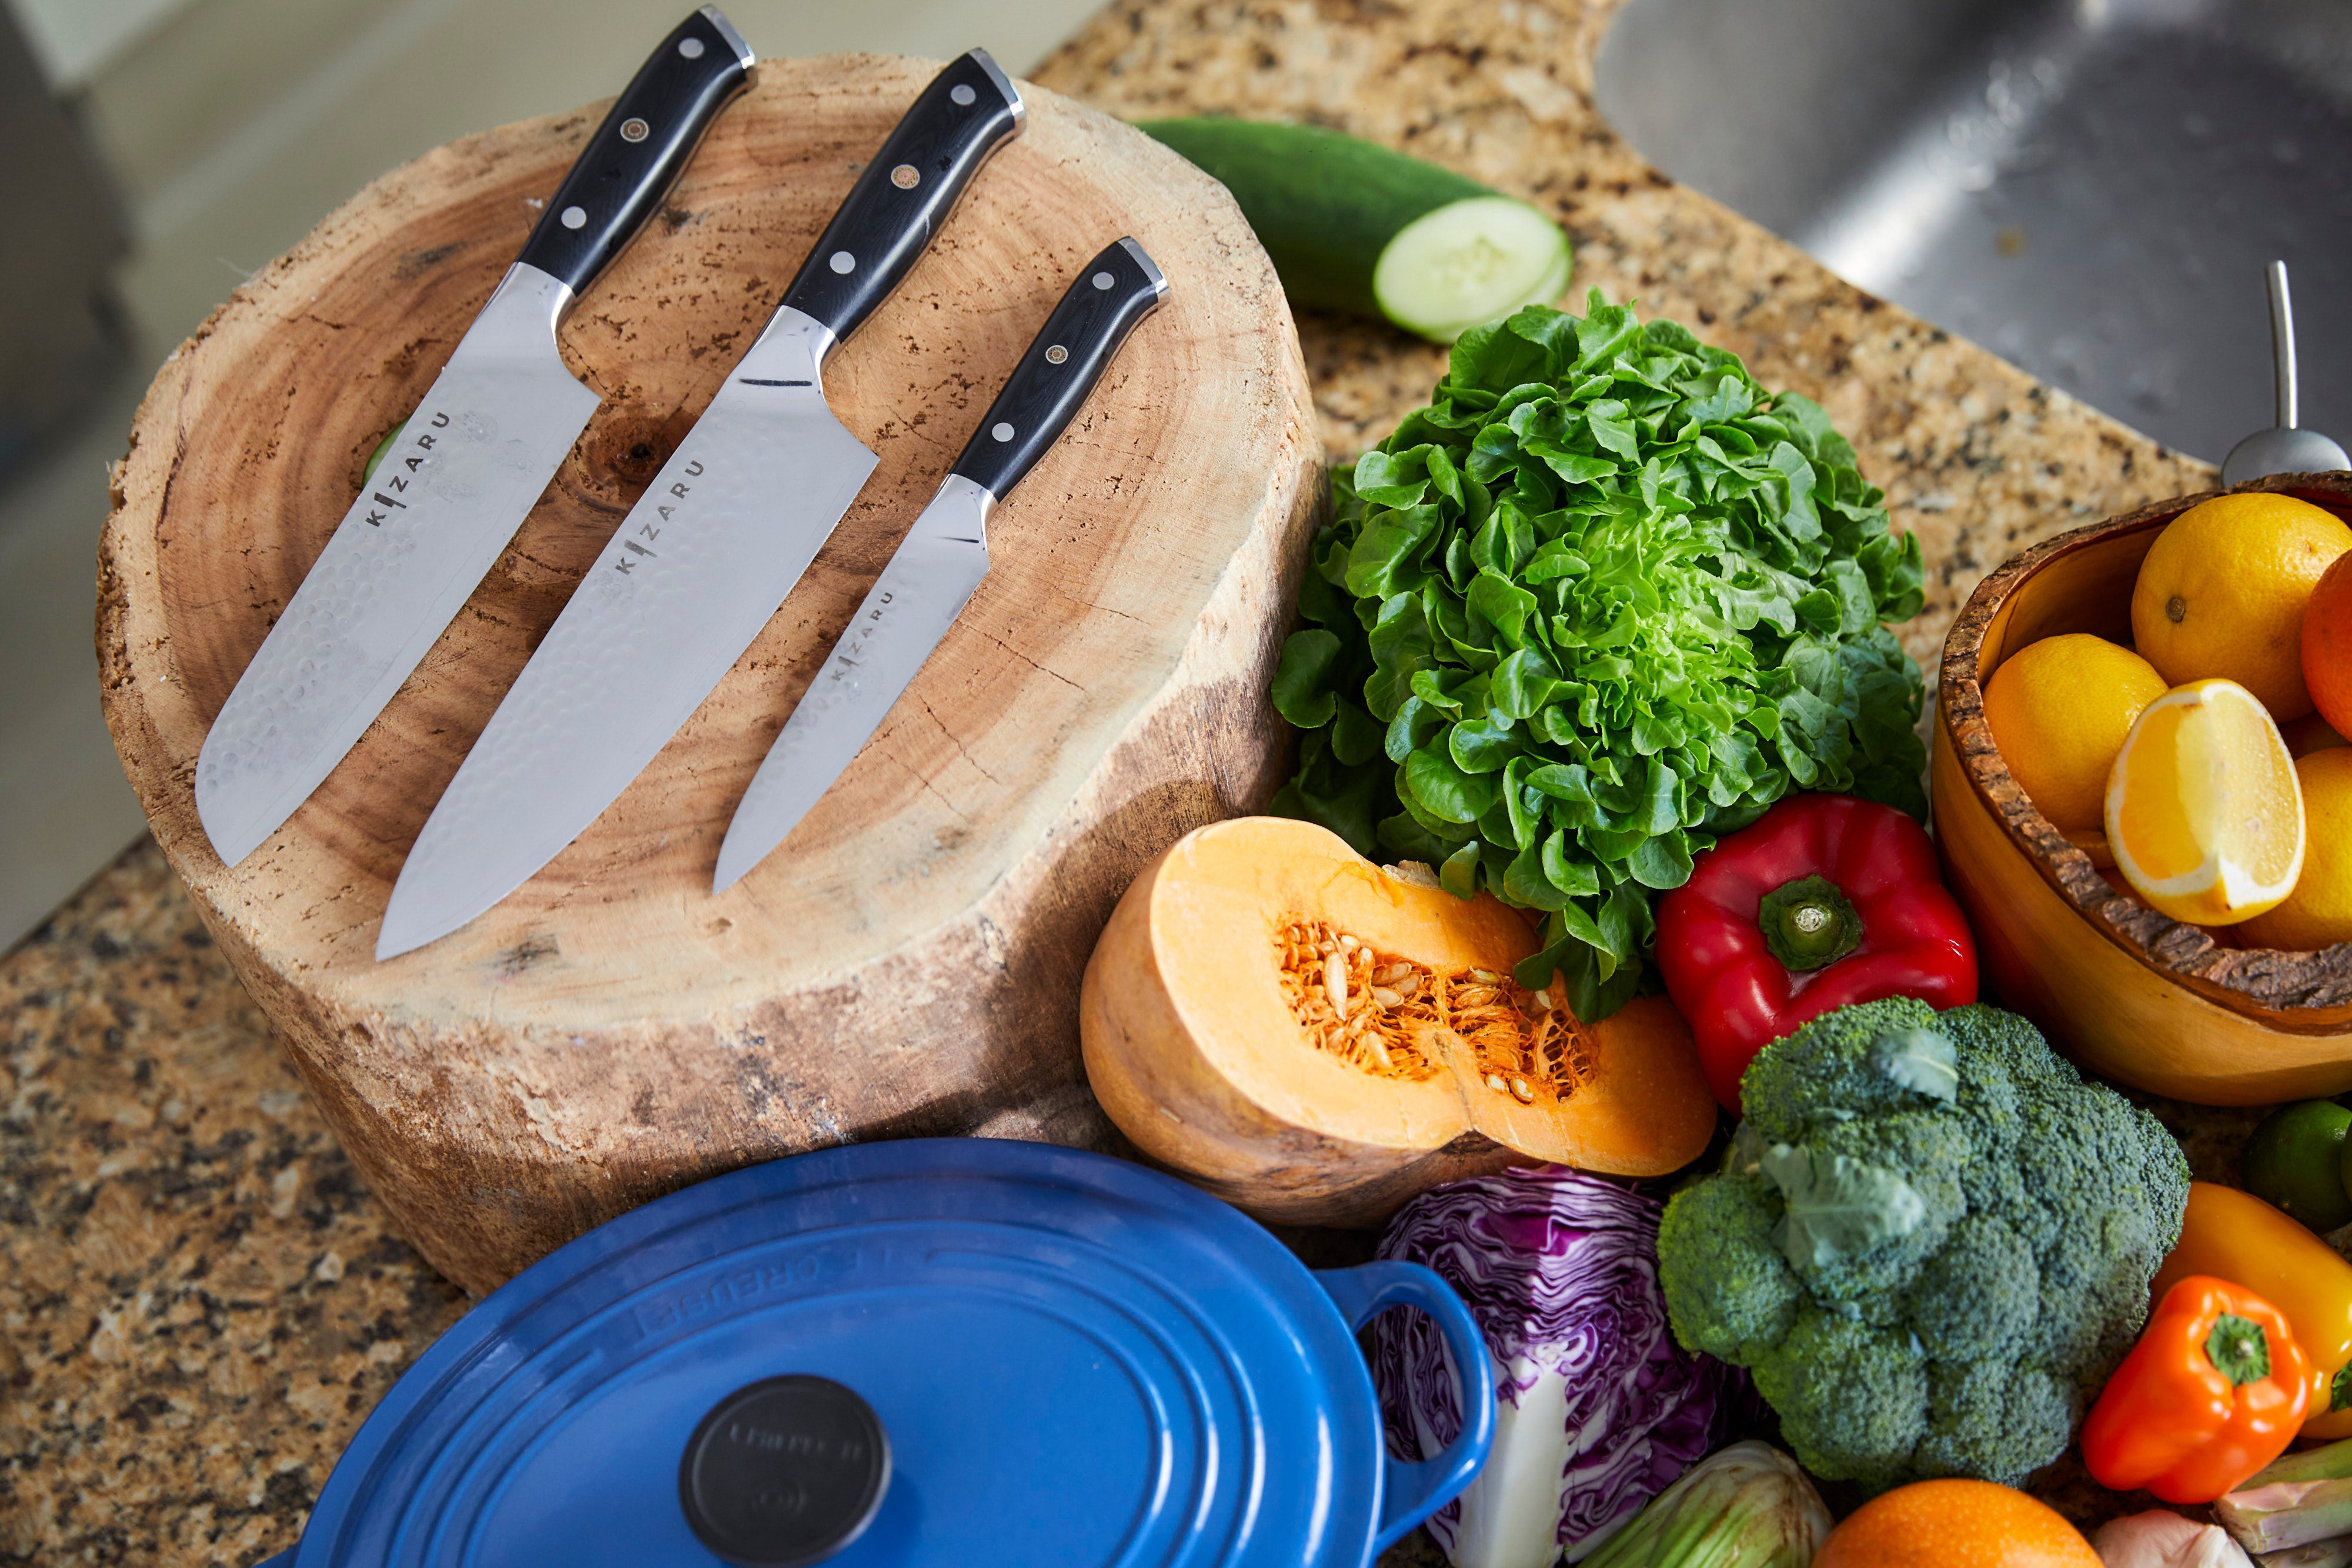 Should Kitchen Knives Go In The Dishwasher? | 3 Care Tips For Your Knives